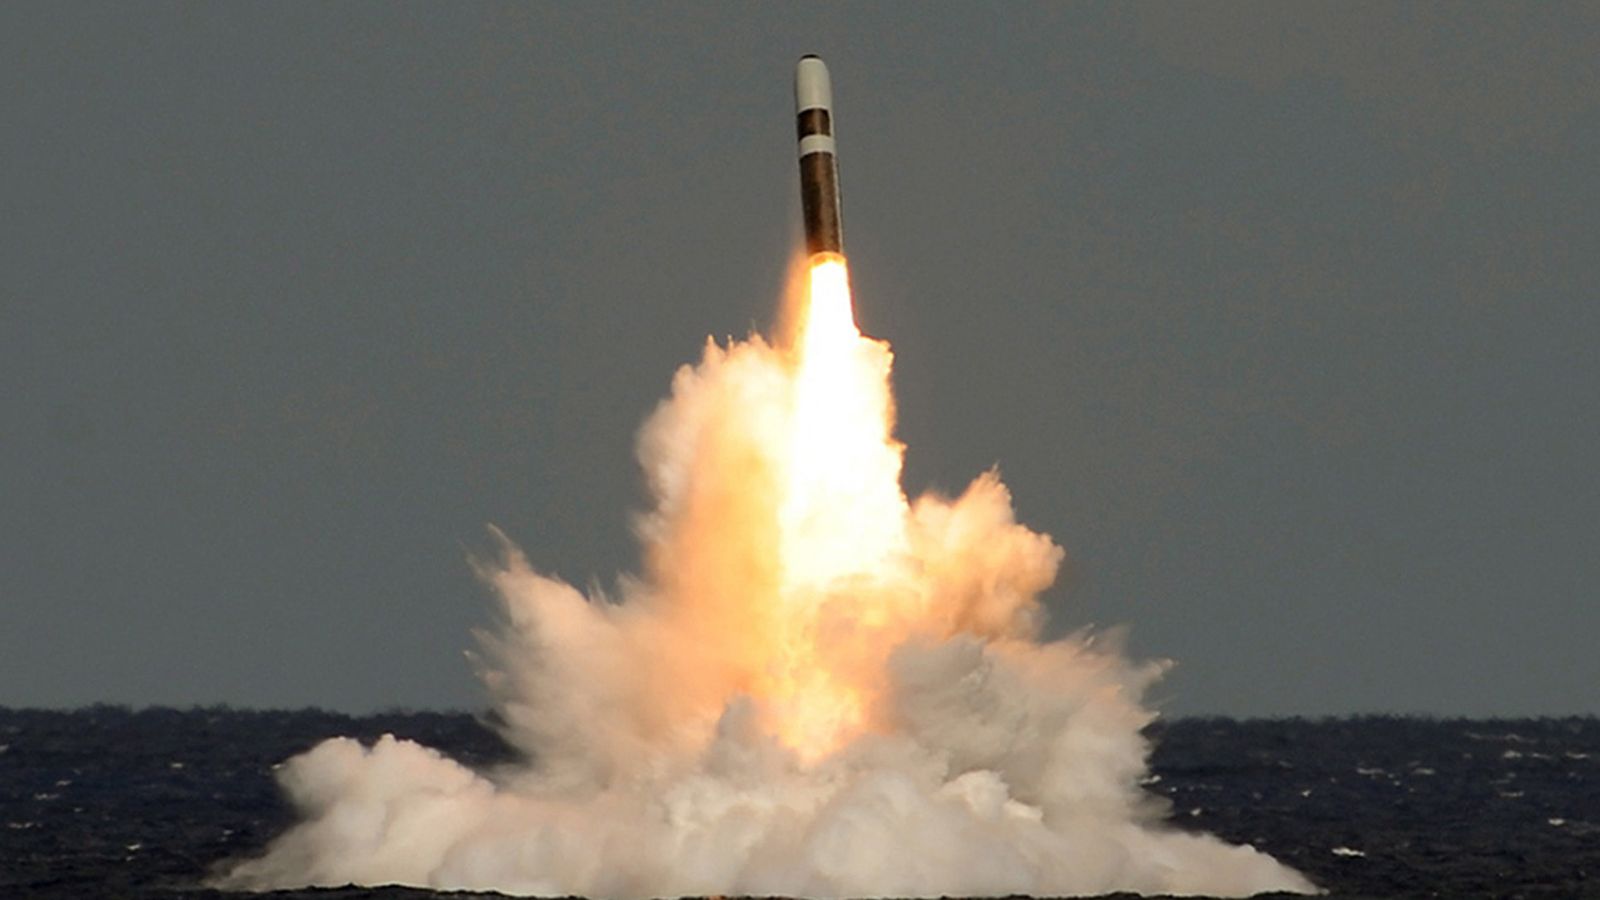 Trident missiles are reliable and nuclear weapons can be fired if needed, government says